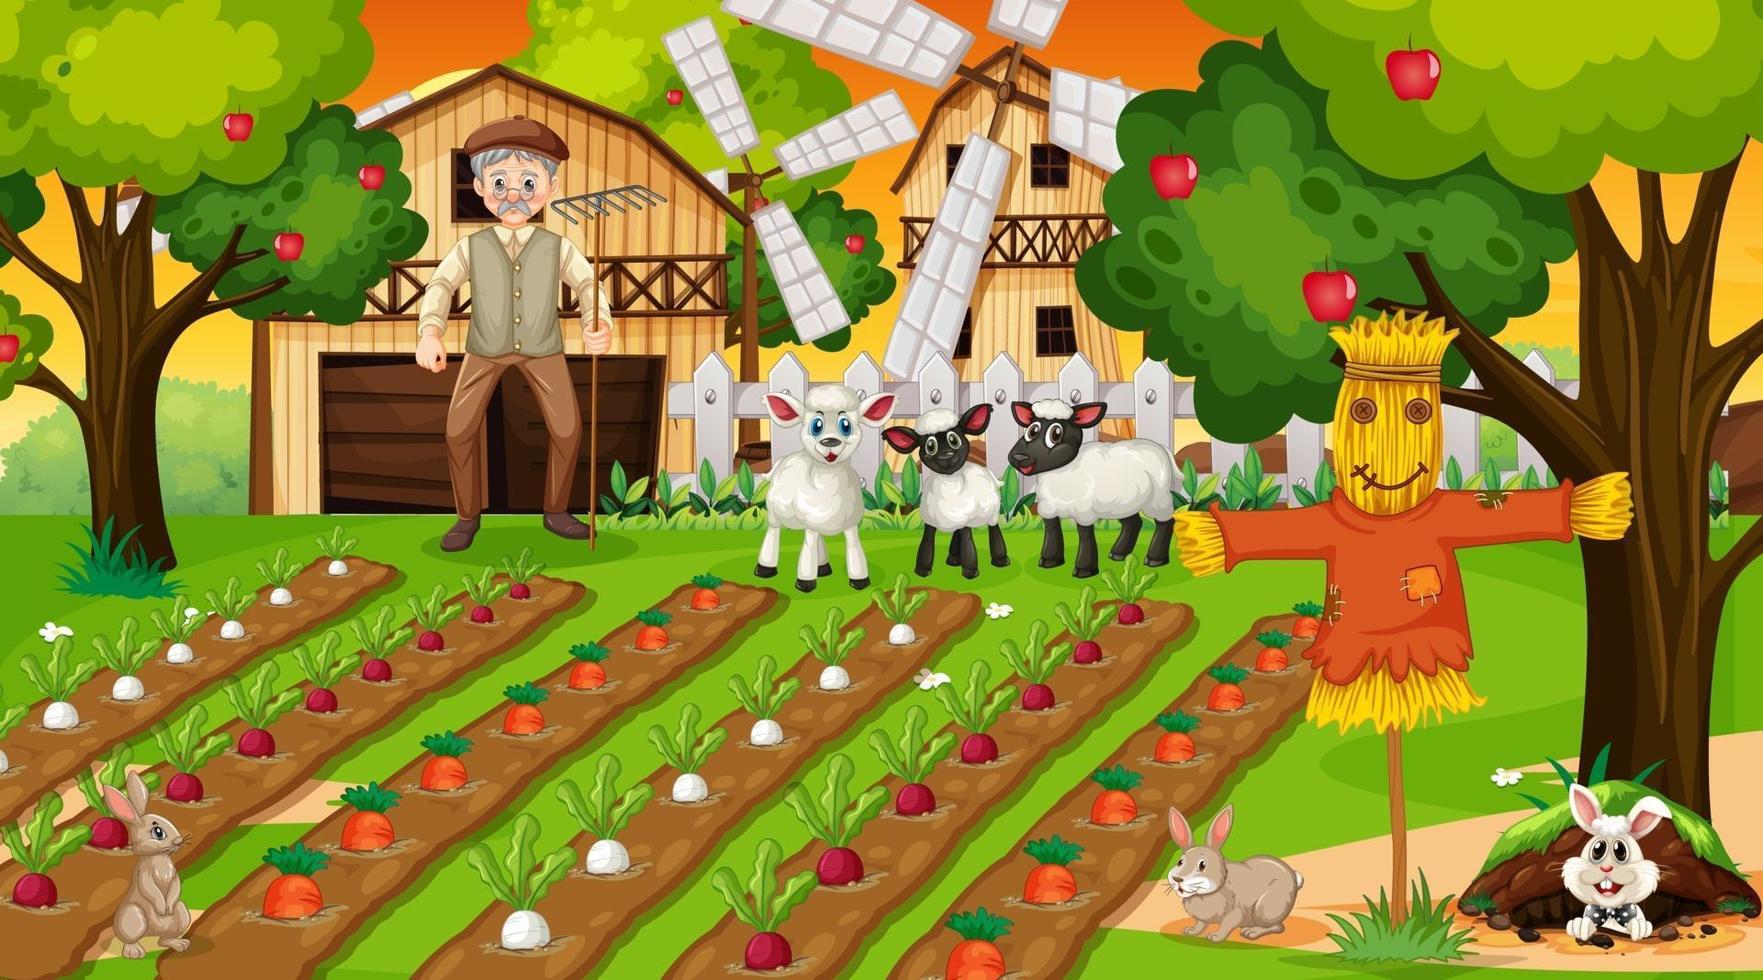 Farm scene at sunset with old farmer man and cute animals vector